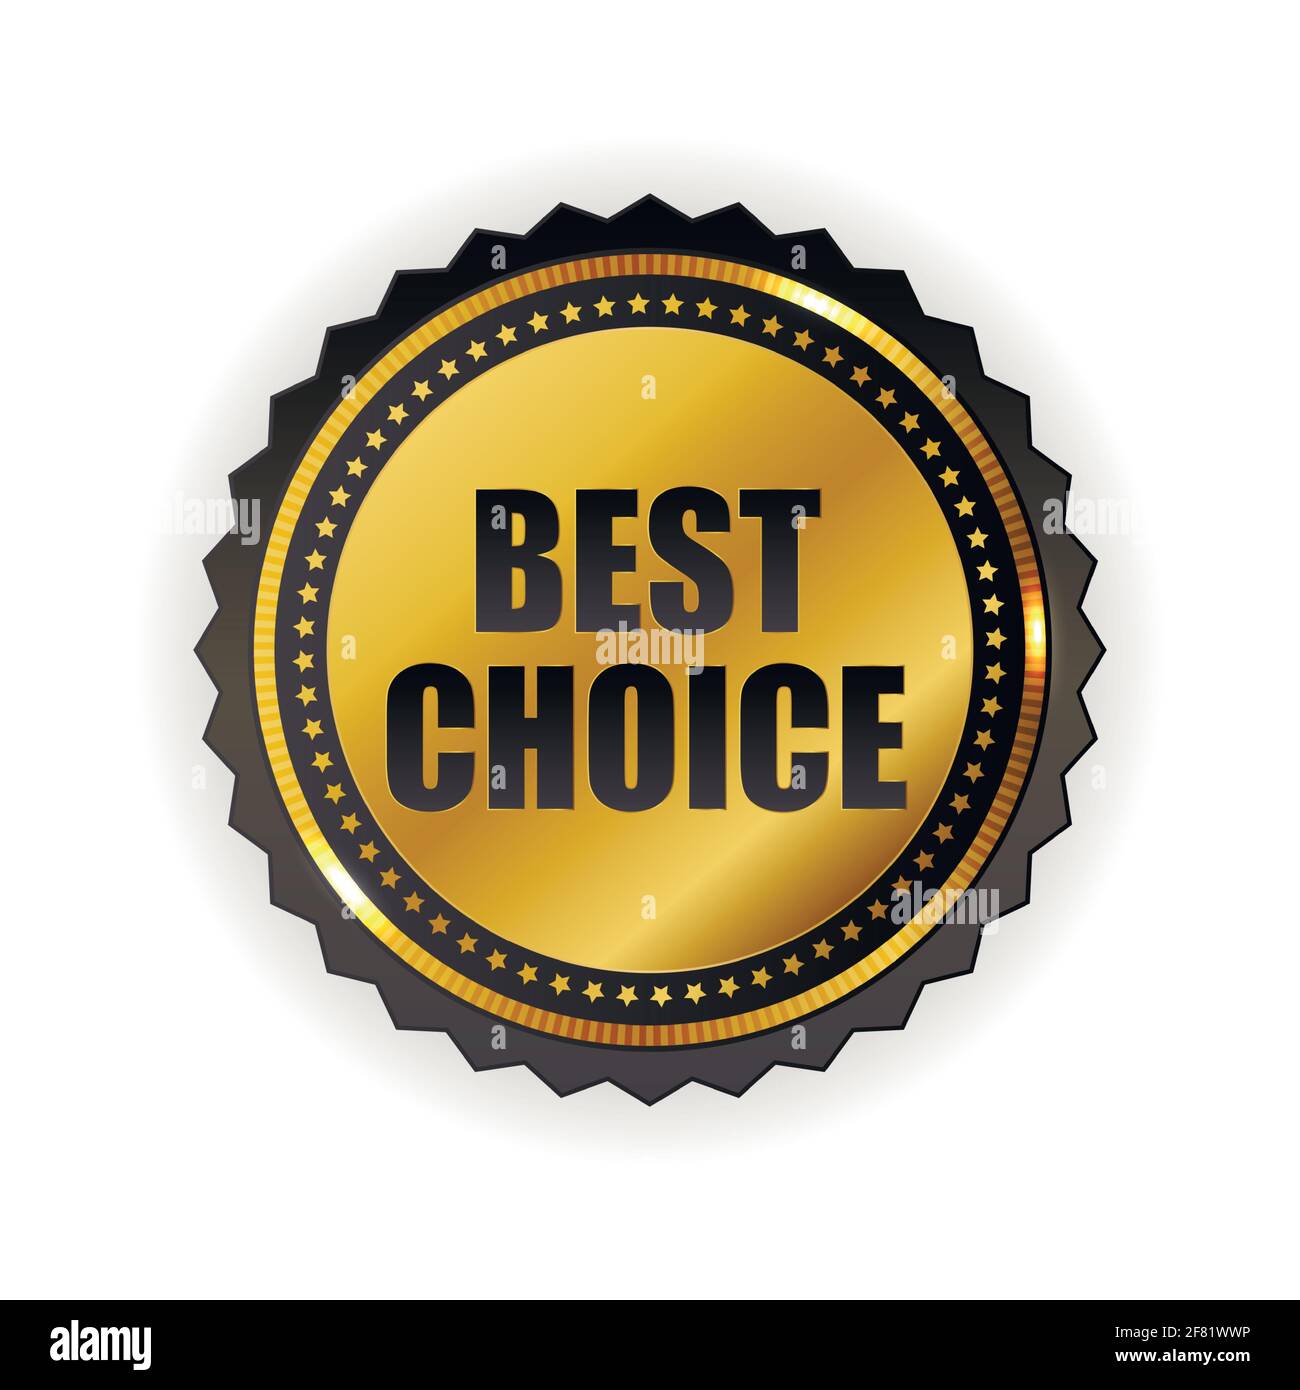 Best choice label stock vector. Illustration of background - 132831639